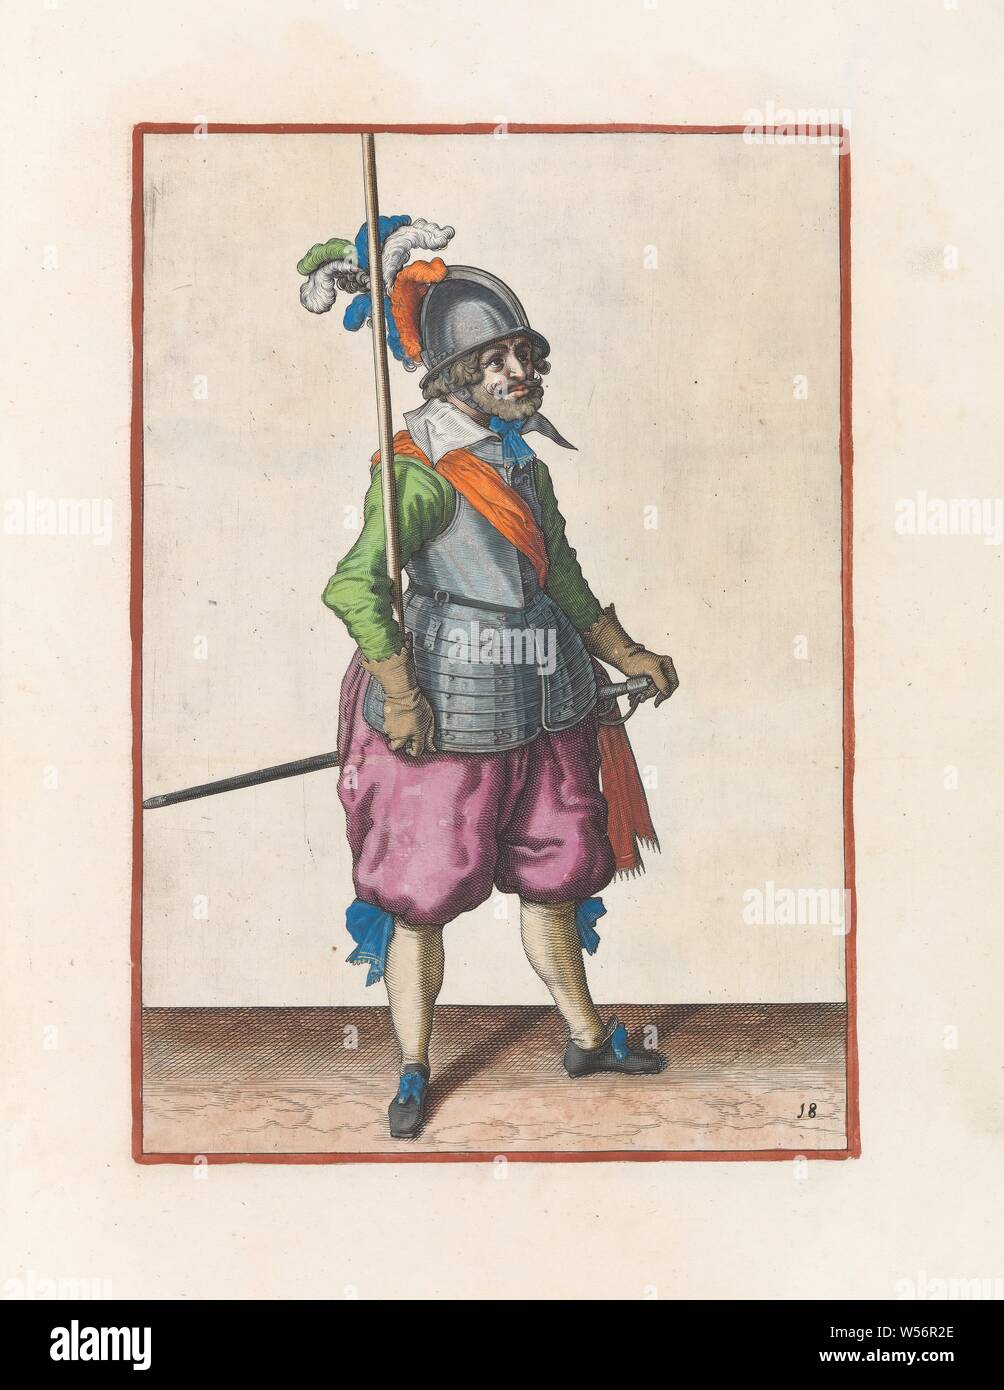 Soldier carrying his spear in the right hand vertically Corte onderwysinghe in the figuerliicke imagehe, interested in right ghebruyck, from all the way a Soldaet is acting of the Spies necessary (original series title), A full-length soldier holding a spear (lance) leaning vertically in his right hand against his right arm. This print is part of the series of 32 hand-numbered prints of skewers in the Arms Act. This copy with the number printed, handling of weapons, military training, helved weapons, polearms (for striking, hacking, thrusting): lance, Jacob de Gheyn (II) (workshop of), Stock Photo